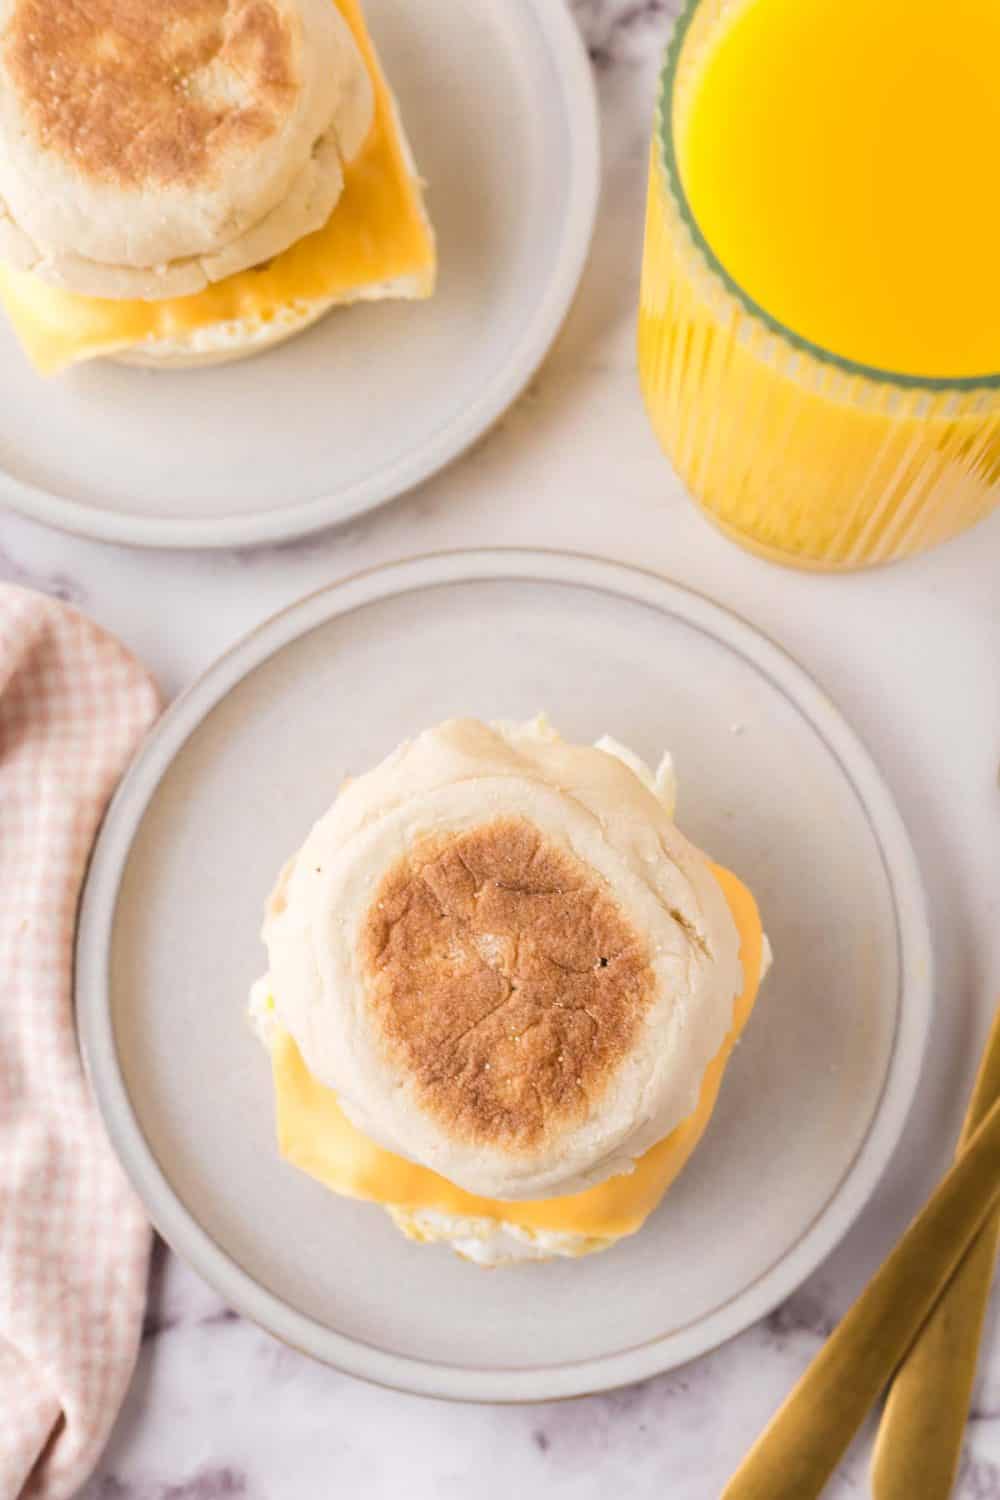 English muffin egg and sausage breakfast sandwich.